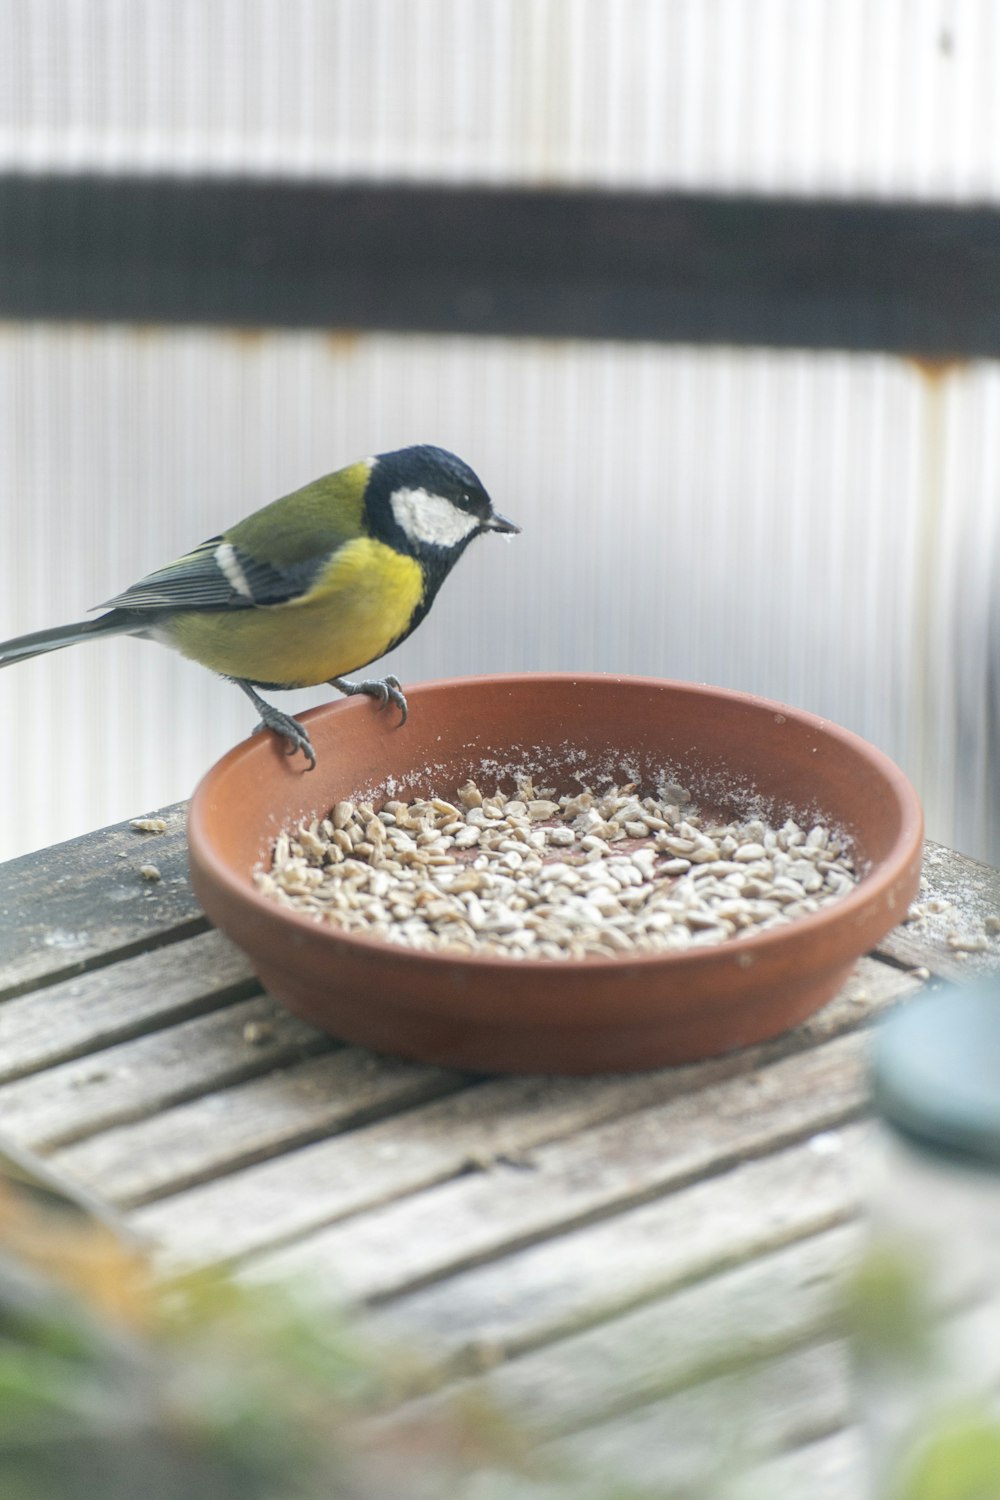 a bird standing on top of a bowl of food